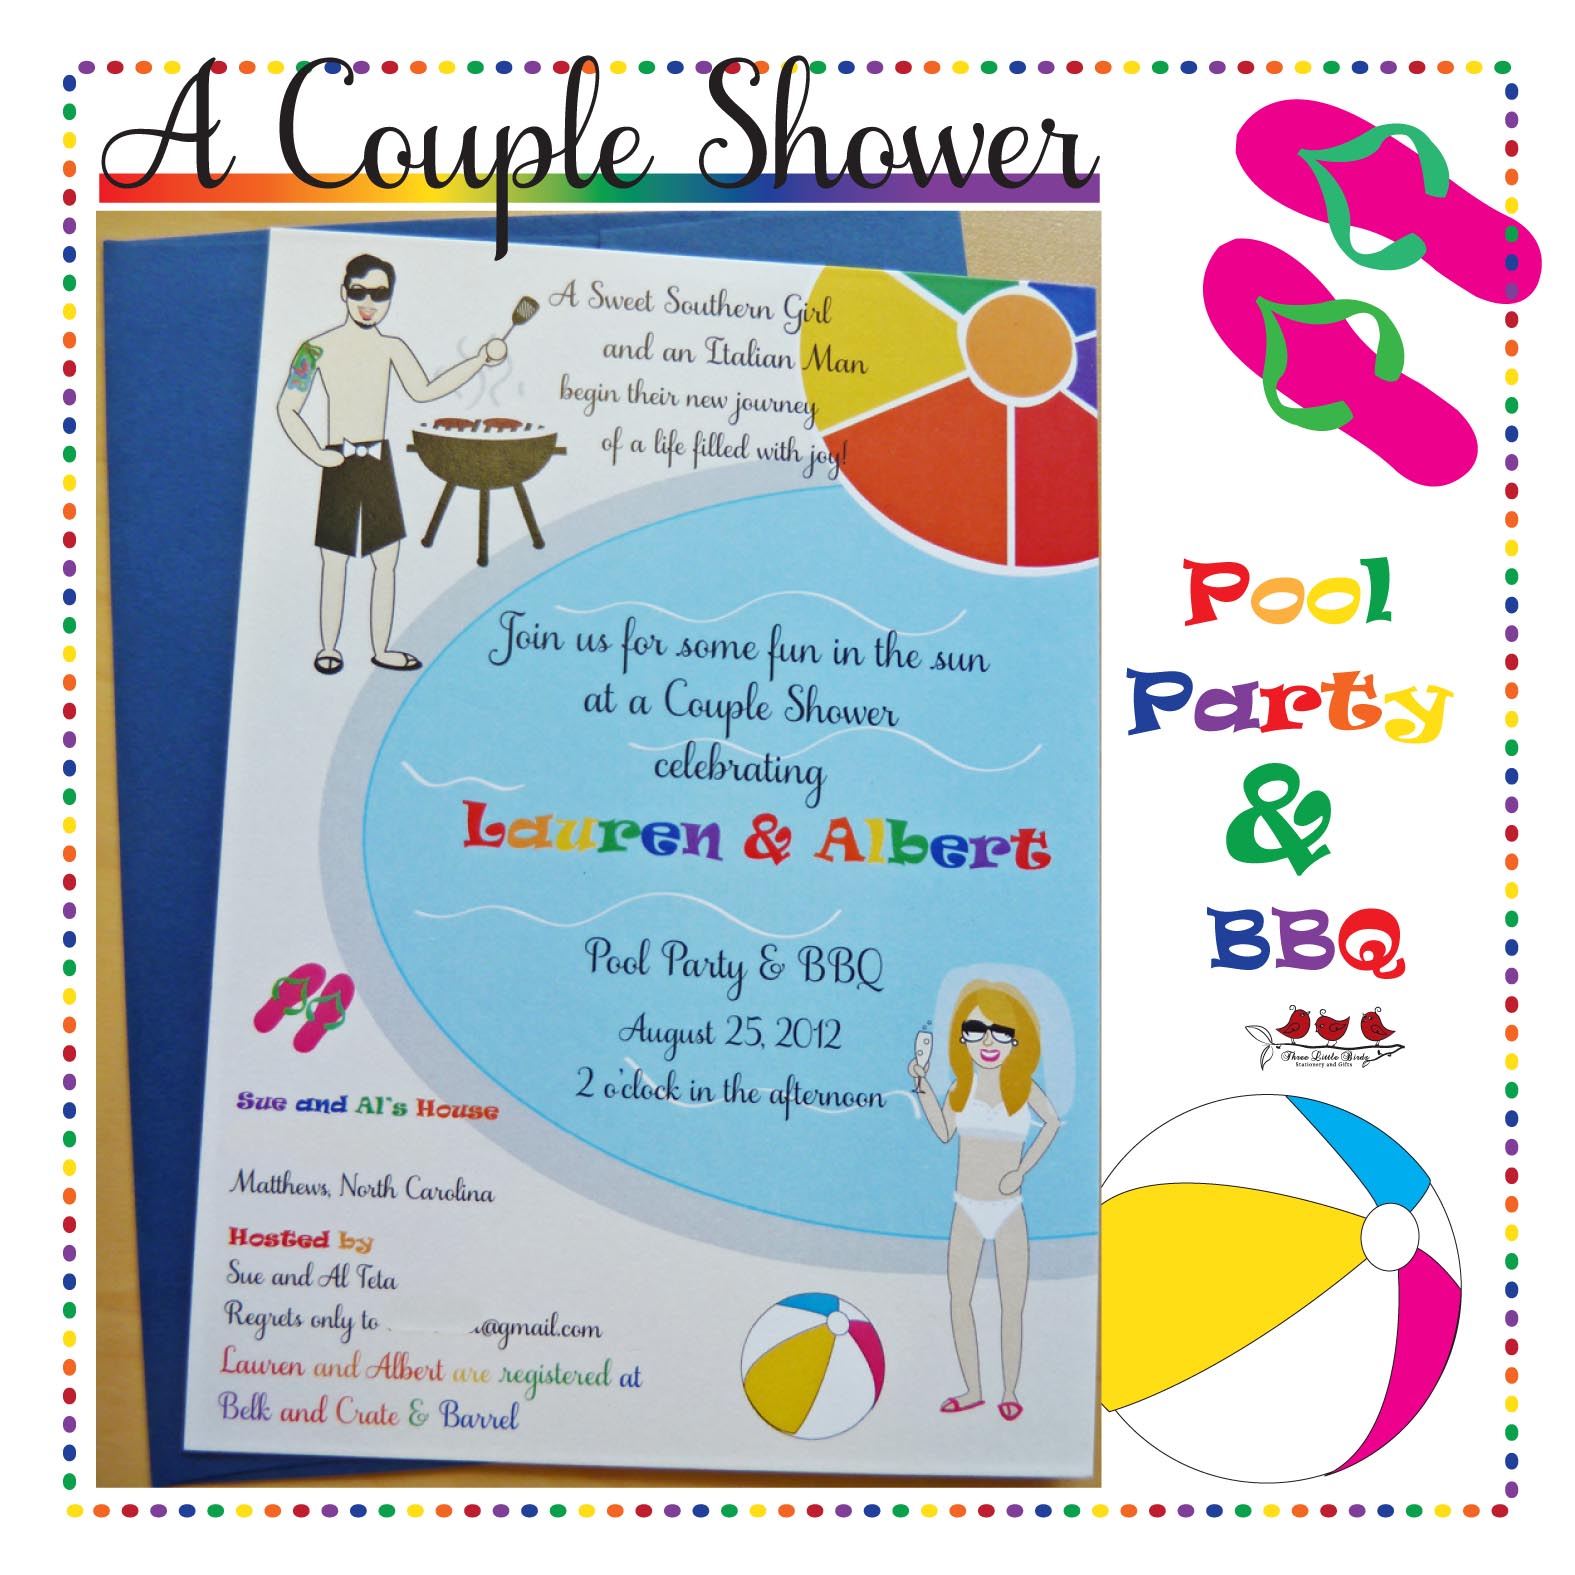 ... invitation for their bridal shower the shower for couples was also a